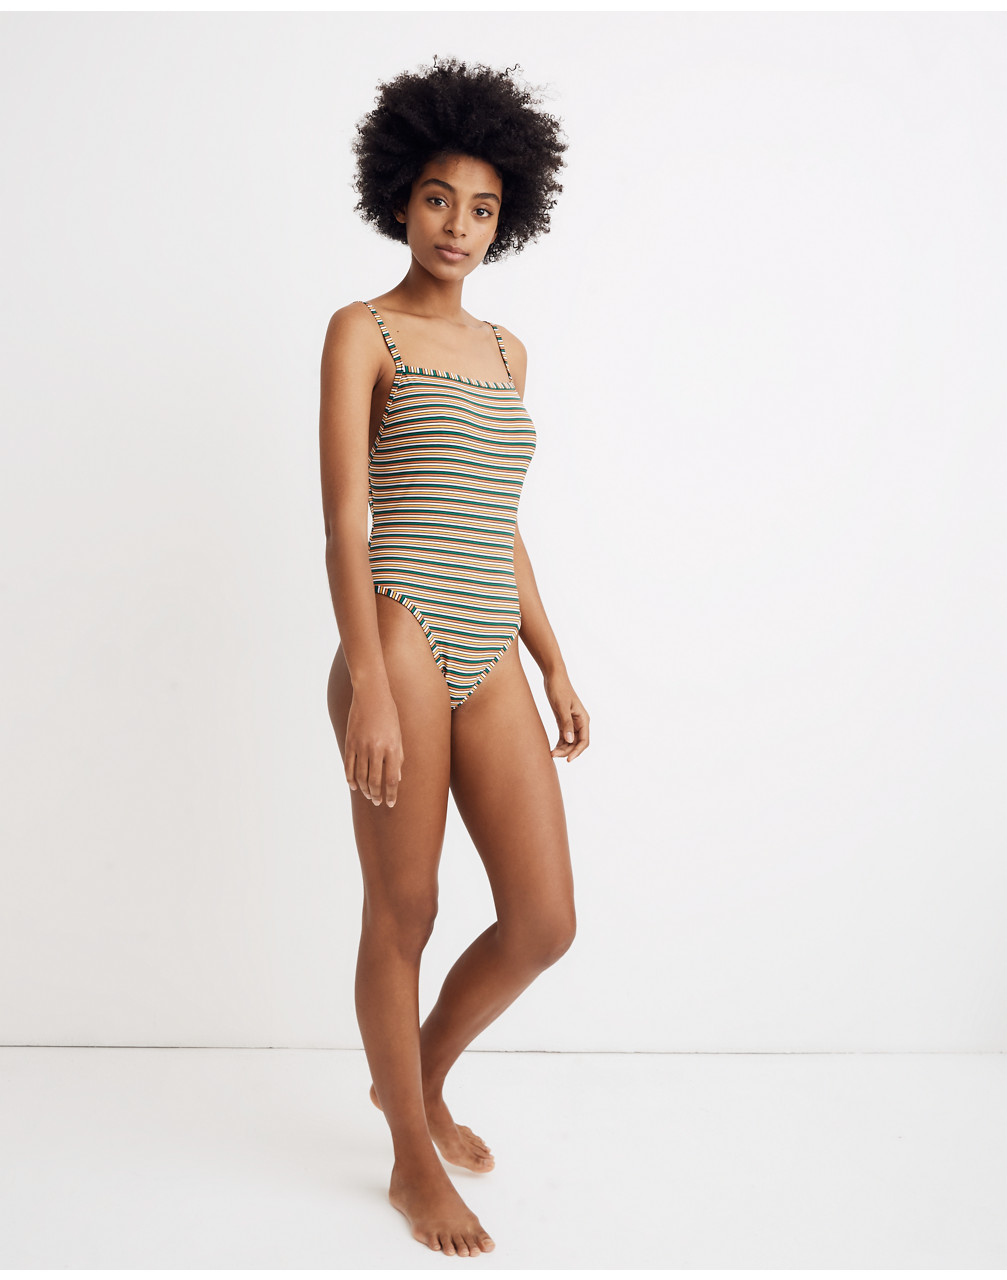 Madewell Second Wave Straight One-Piece Swimsuit in Rainbow Stripe in golden lantern image 2